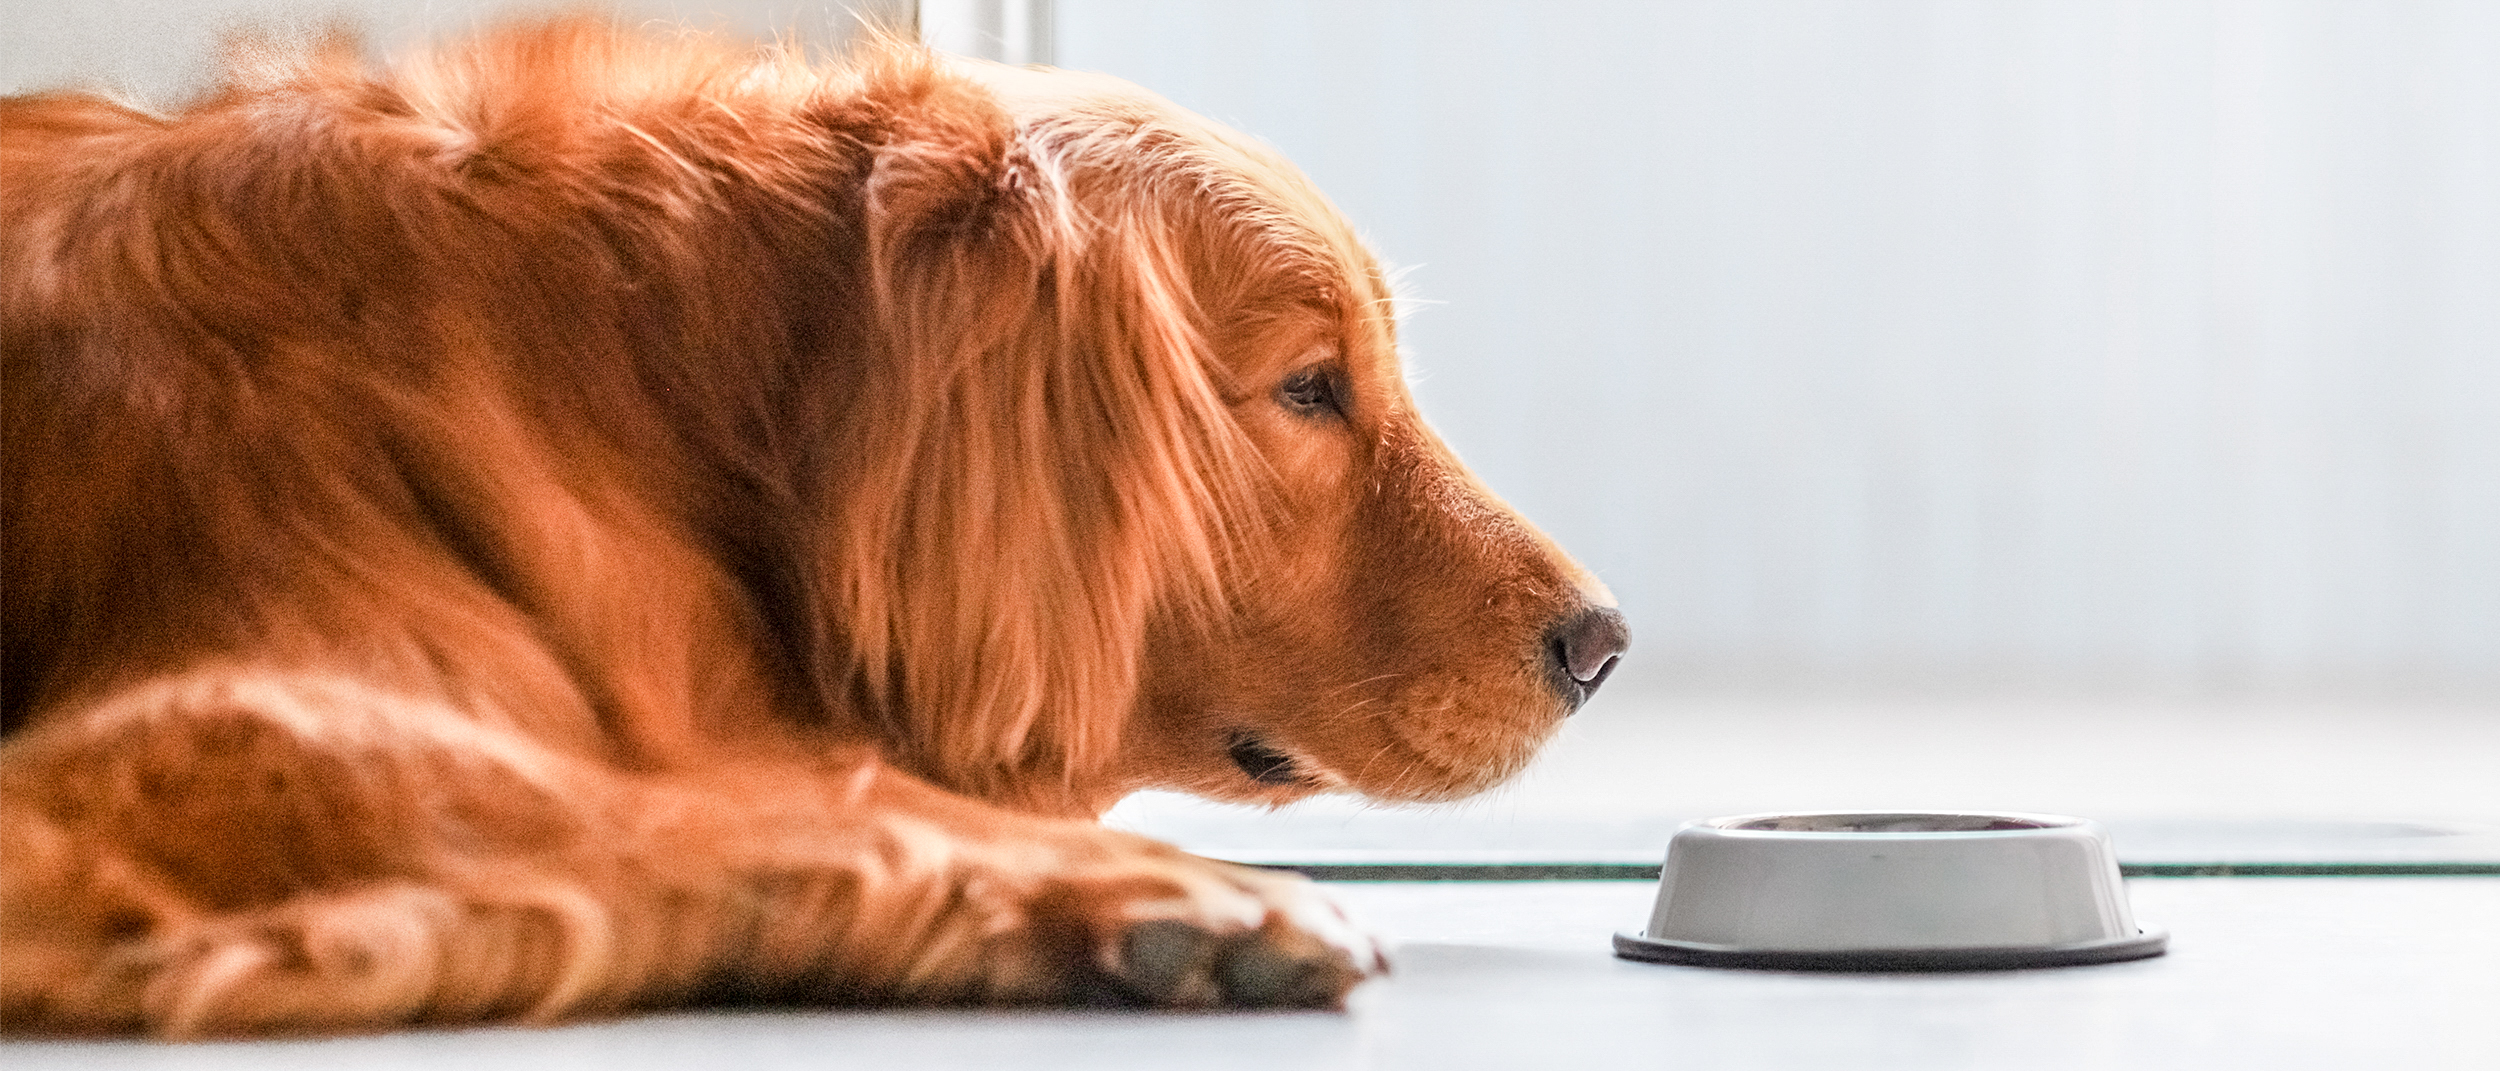 Spotting Signs Of Digestive Problems In Your Dog